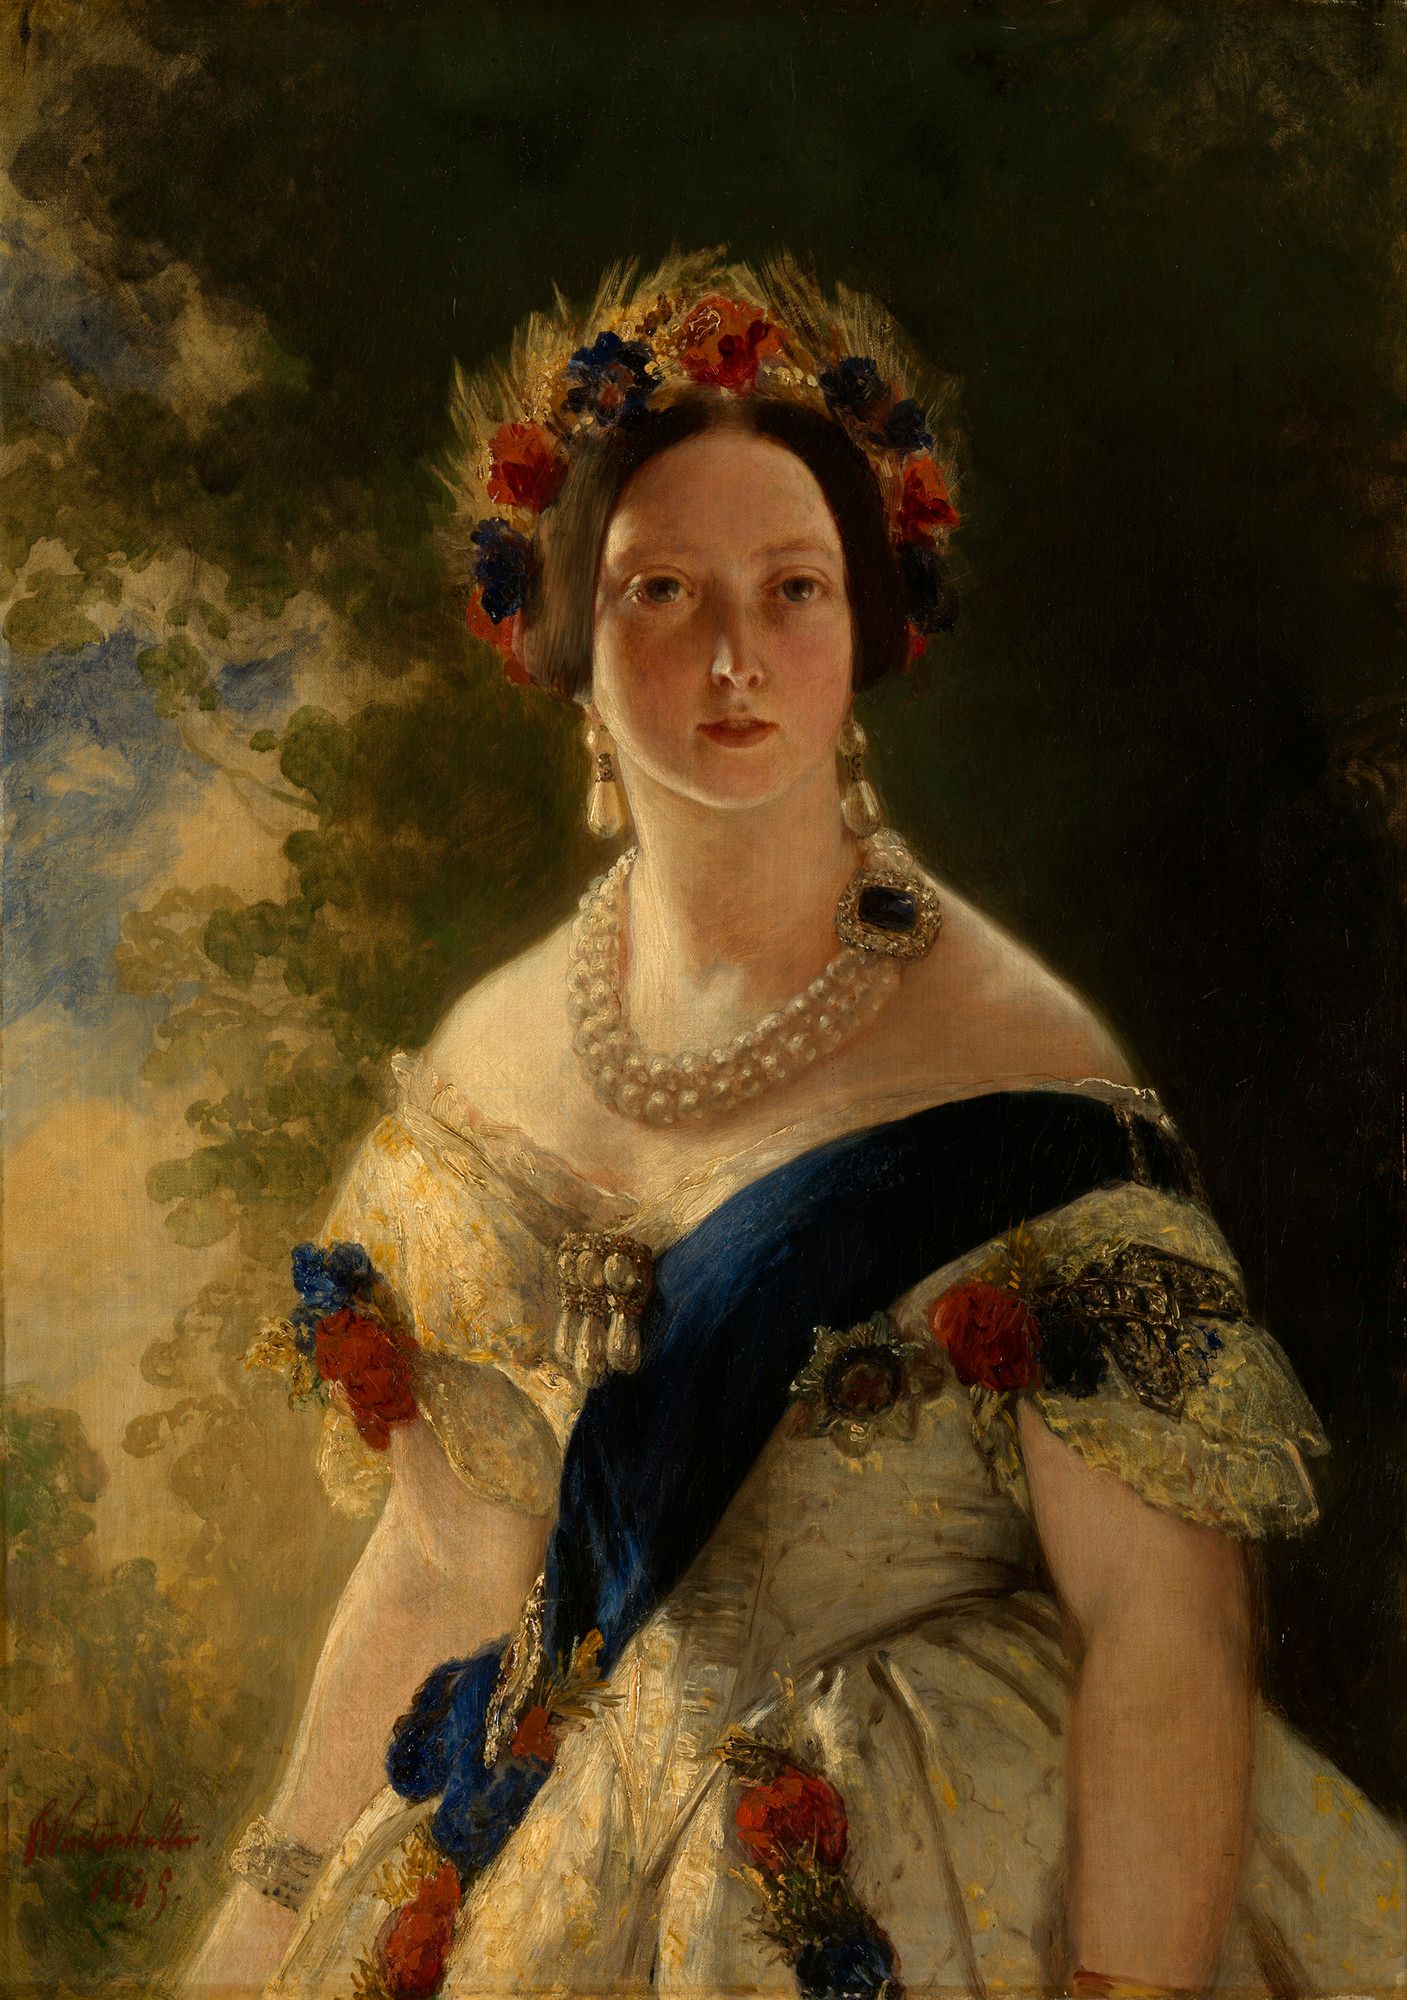 The sapphire claps on the double strand pearl necklace looks to be the same diamond and sapphire brooch given to her on her wedding day by Prince Albert. Queen Victoriam 1845 by Franz Xaver Winterhalter